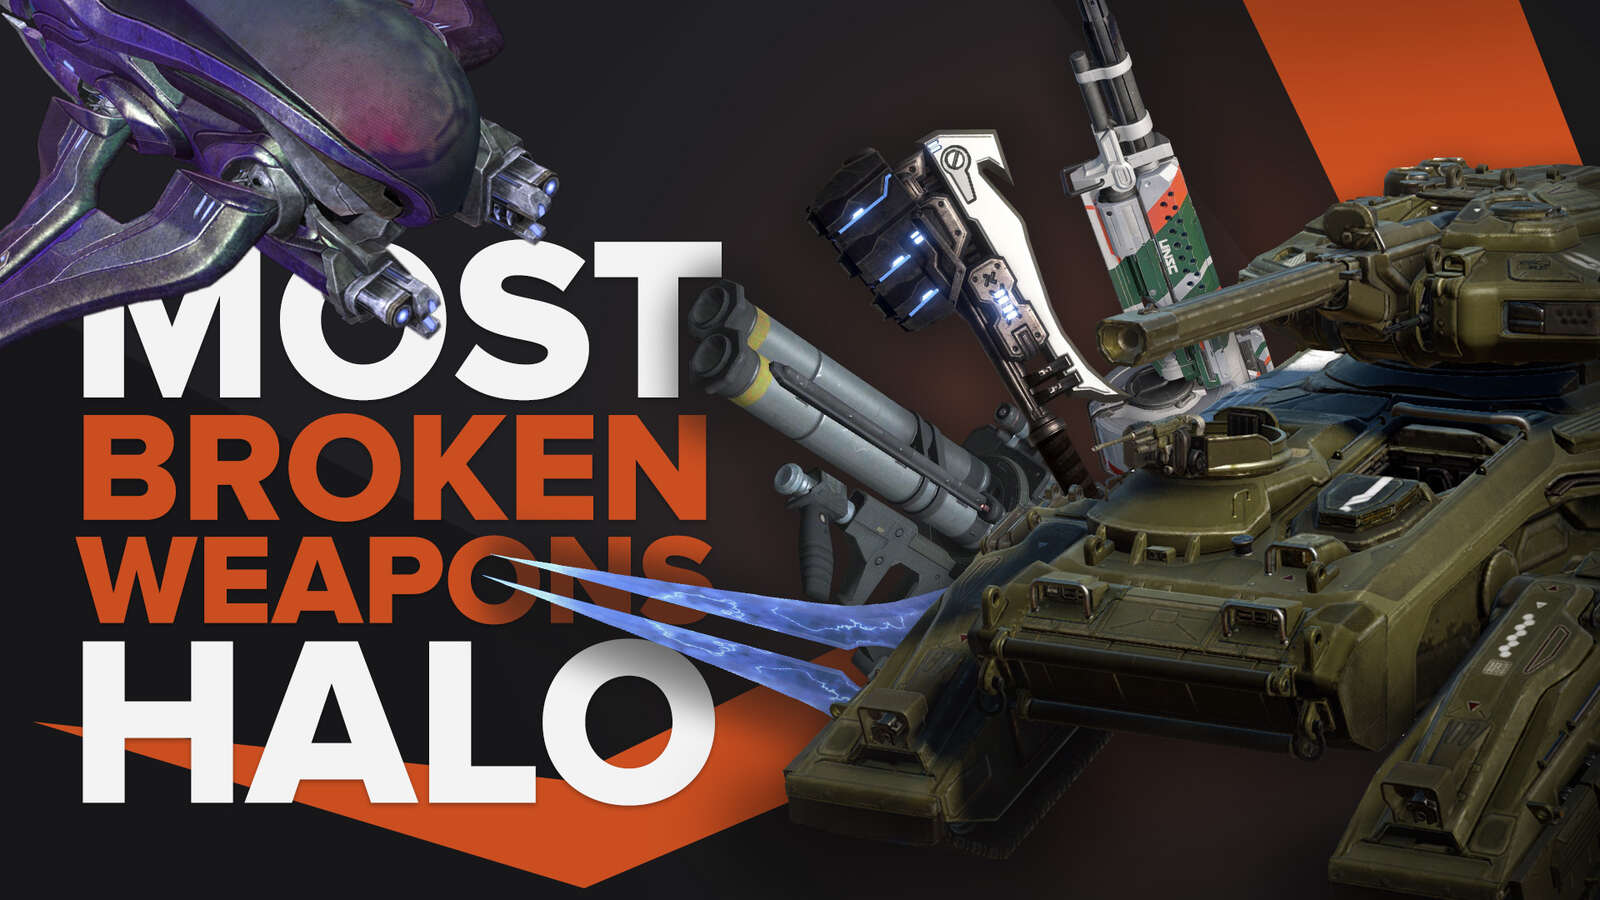 Most Broken Guns & Weapons in All Time Halo [Nostalgic]